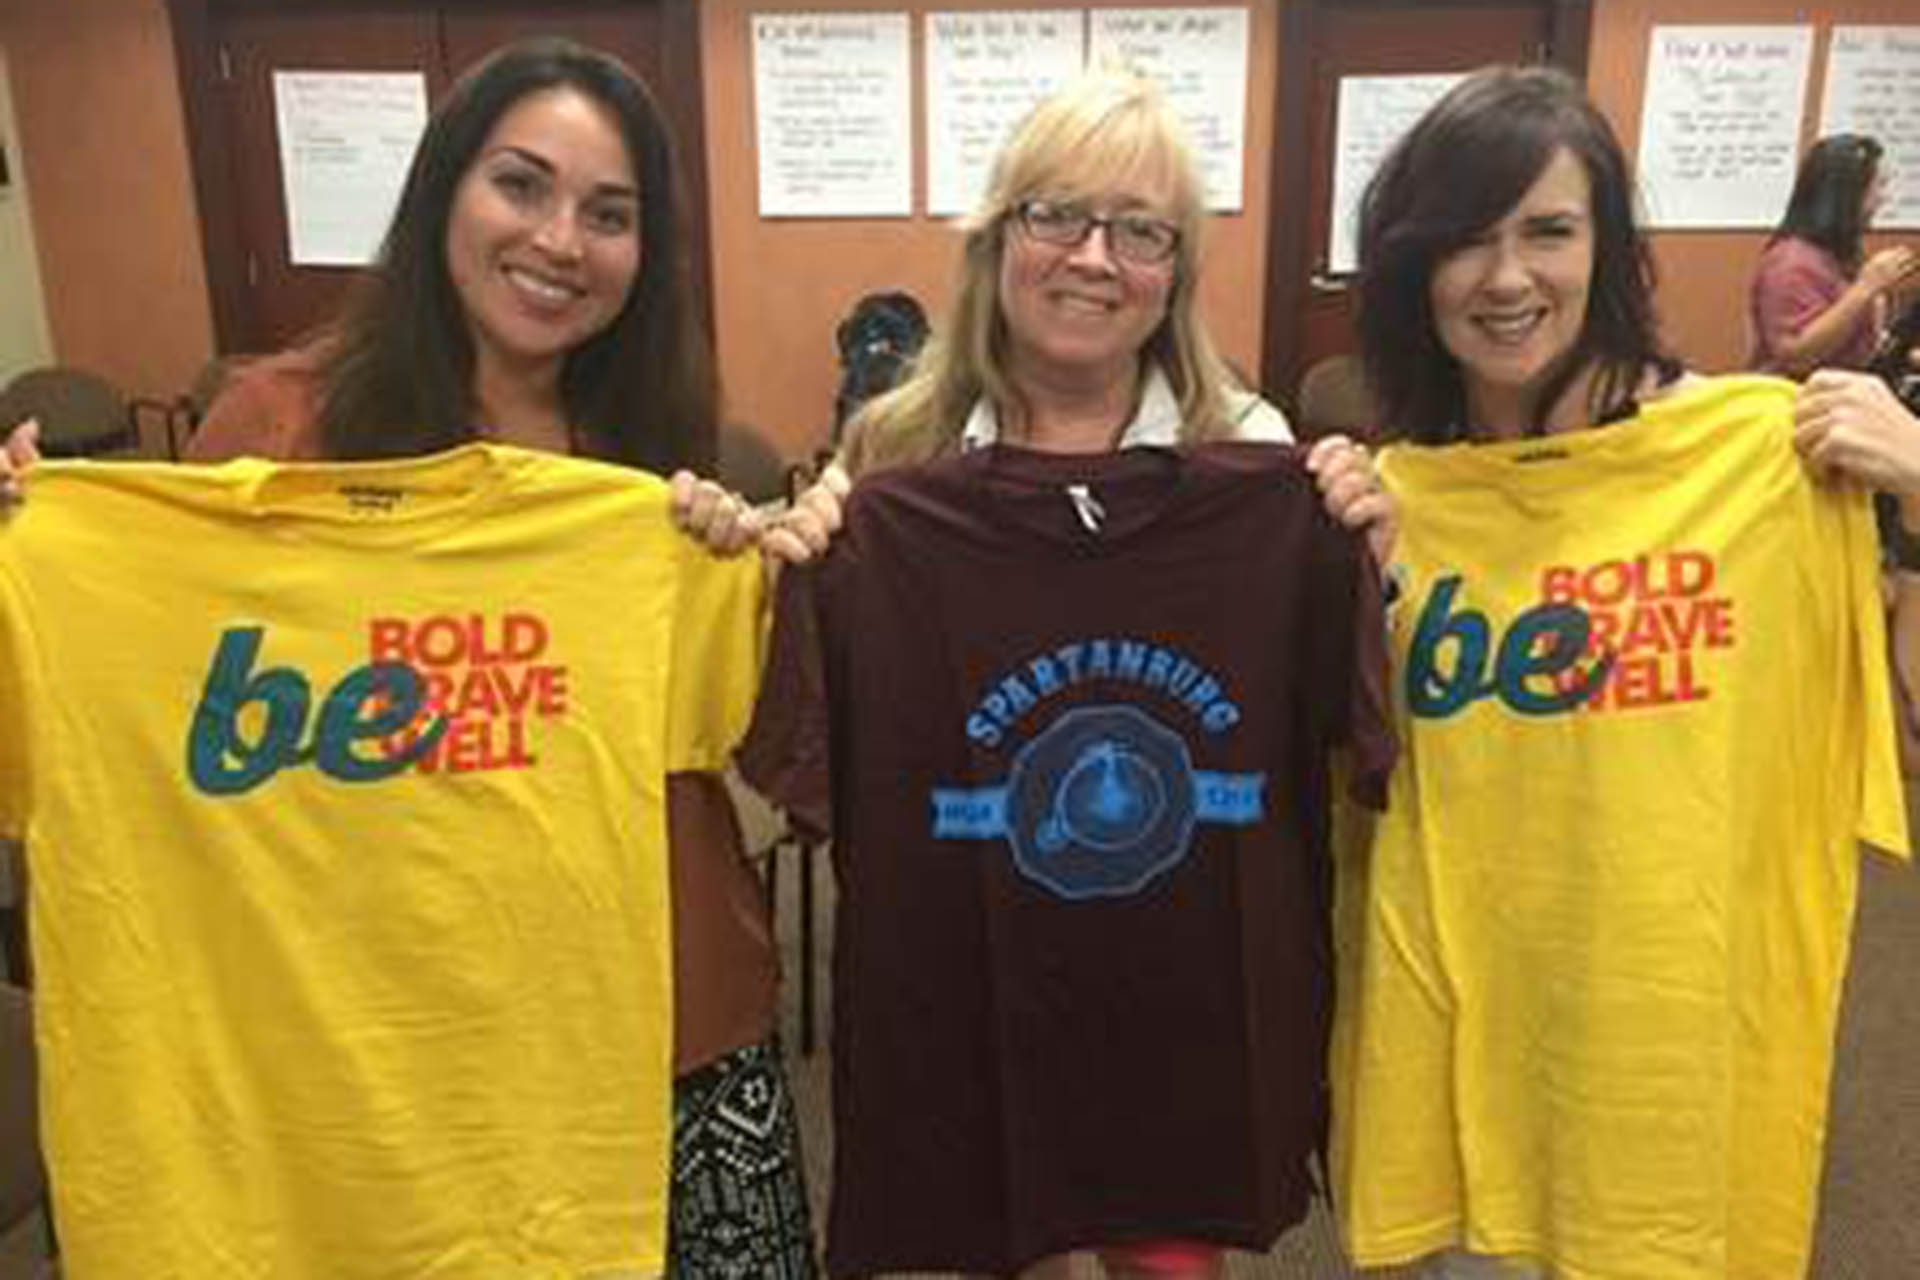 Allison Panella, Kim Tangermann and Shelly Mascari of the Lake County team show off their swag